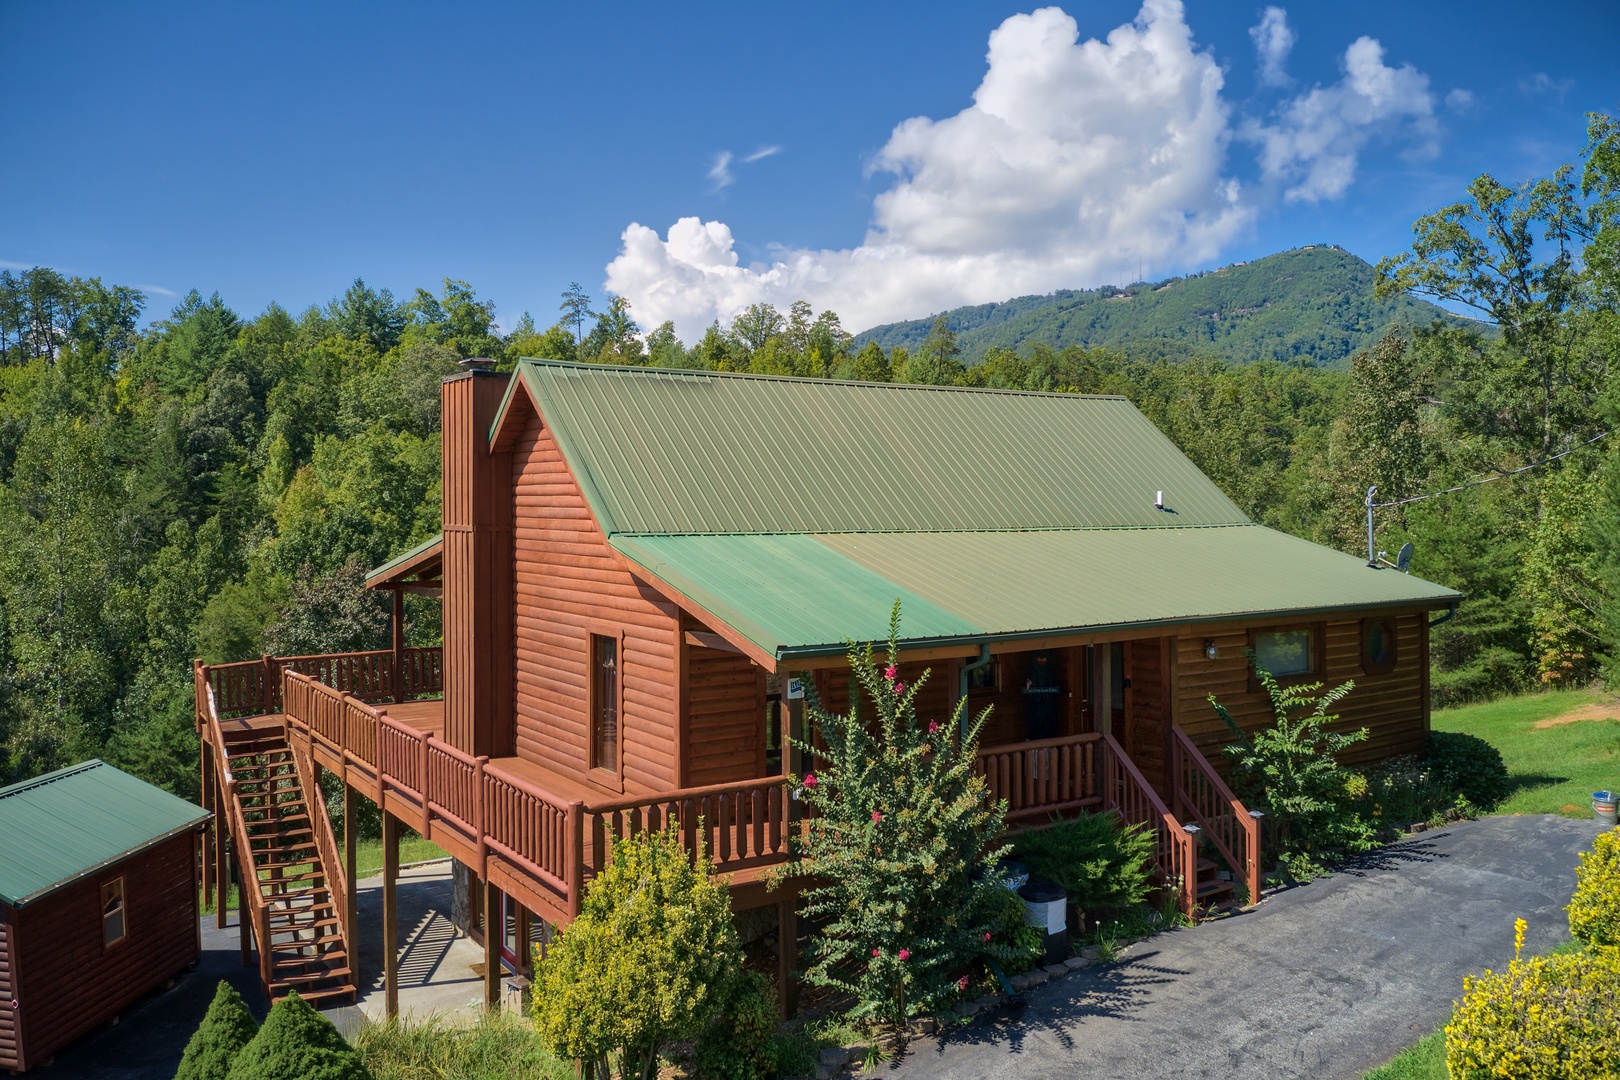 Parking area and cabin entrance at Cabin Fever, a 4-bedroom cabin rental located in Pigeon Forge